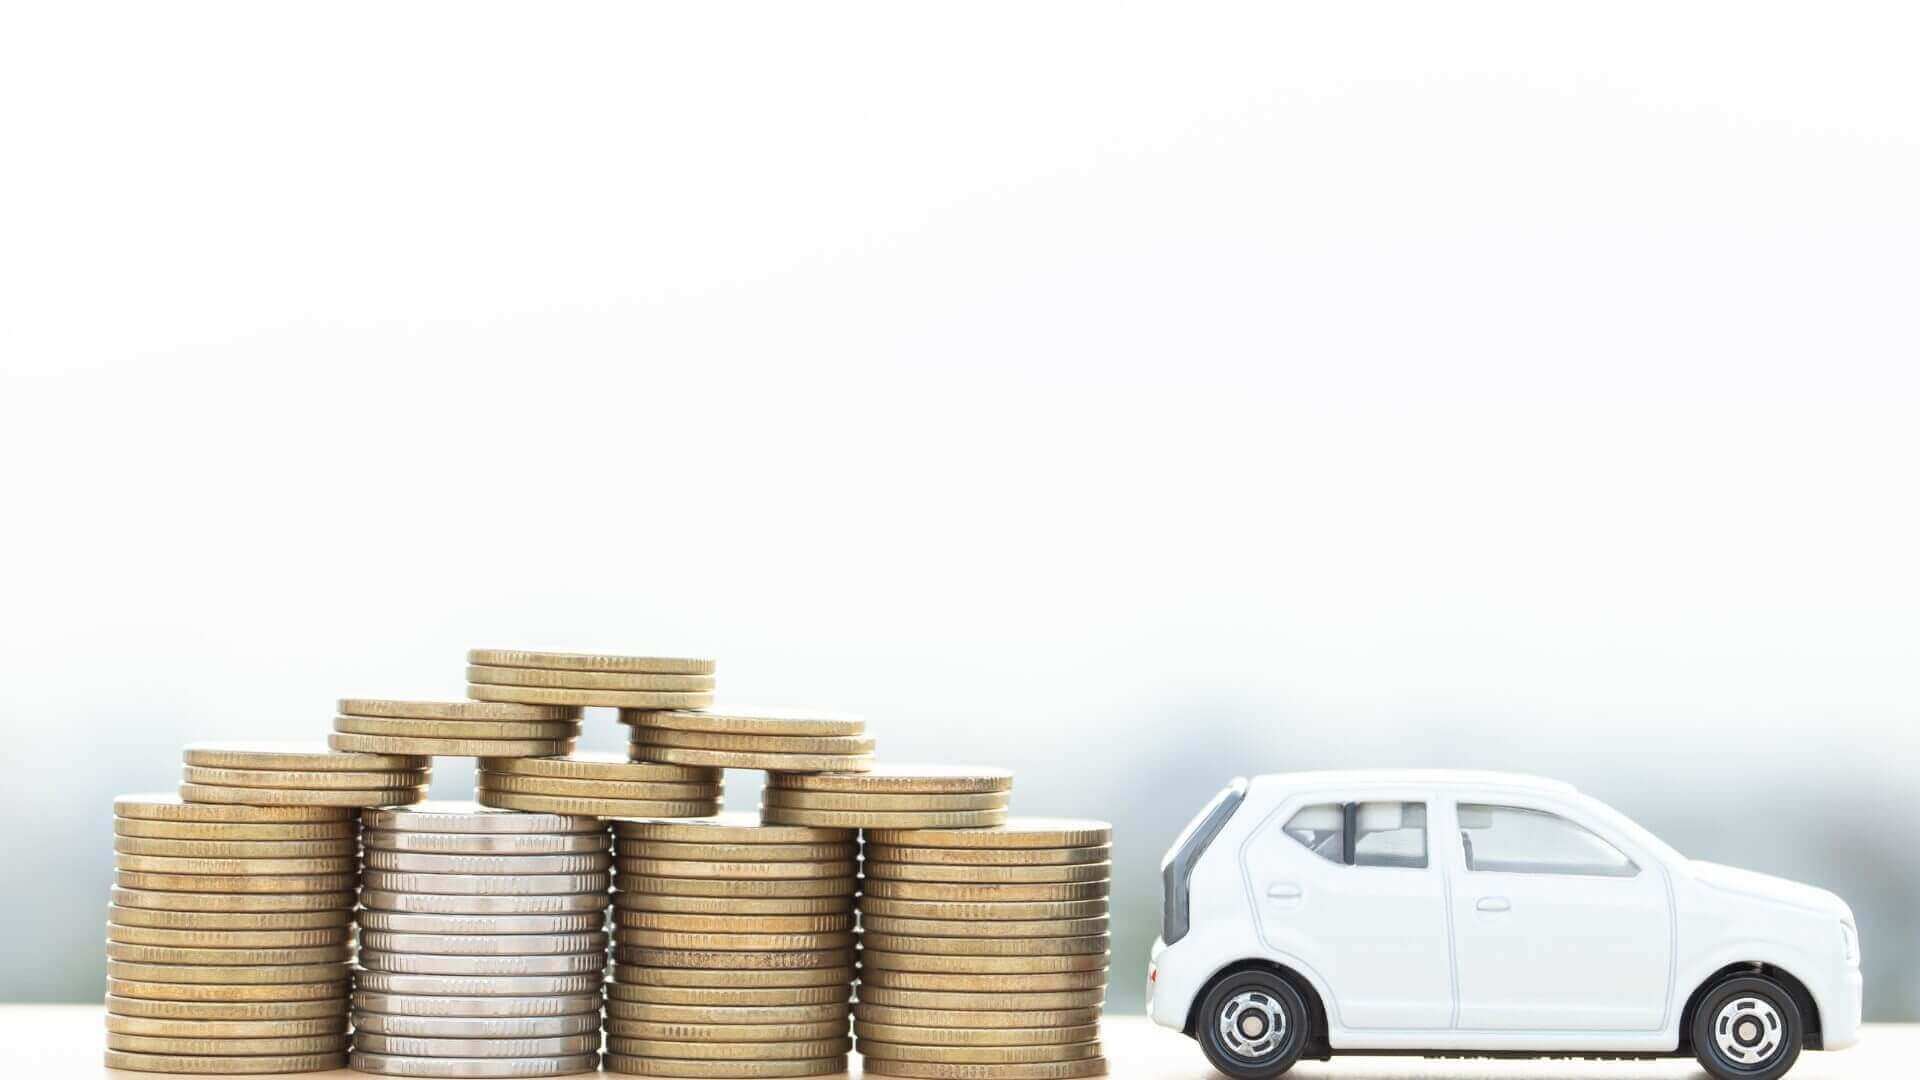 A stack of coins next to a small car model representing the money you can deduct from a vehicle used for business